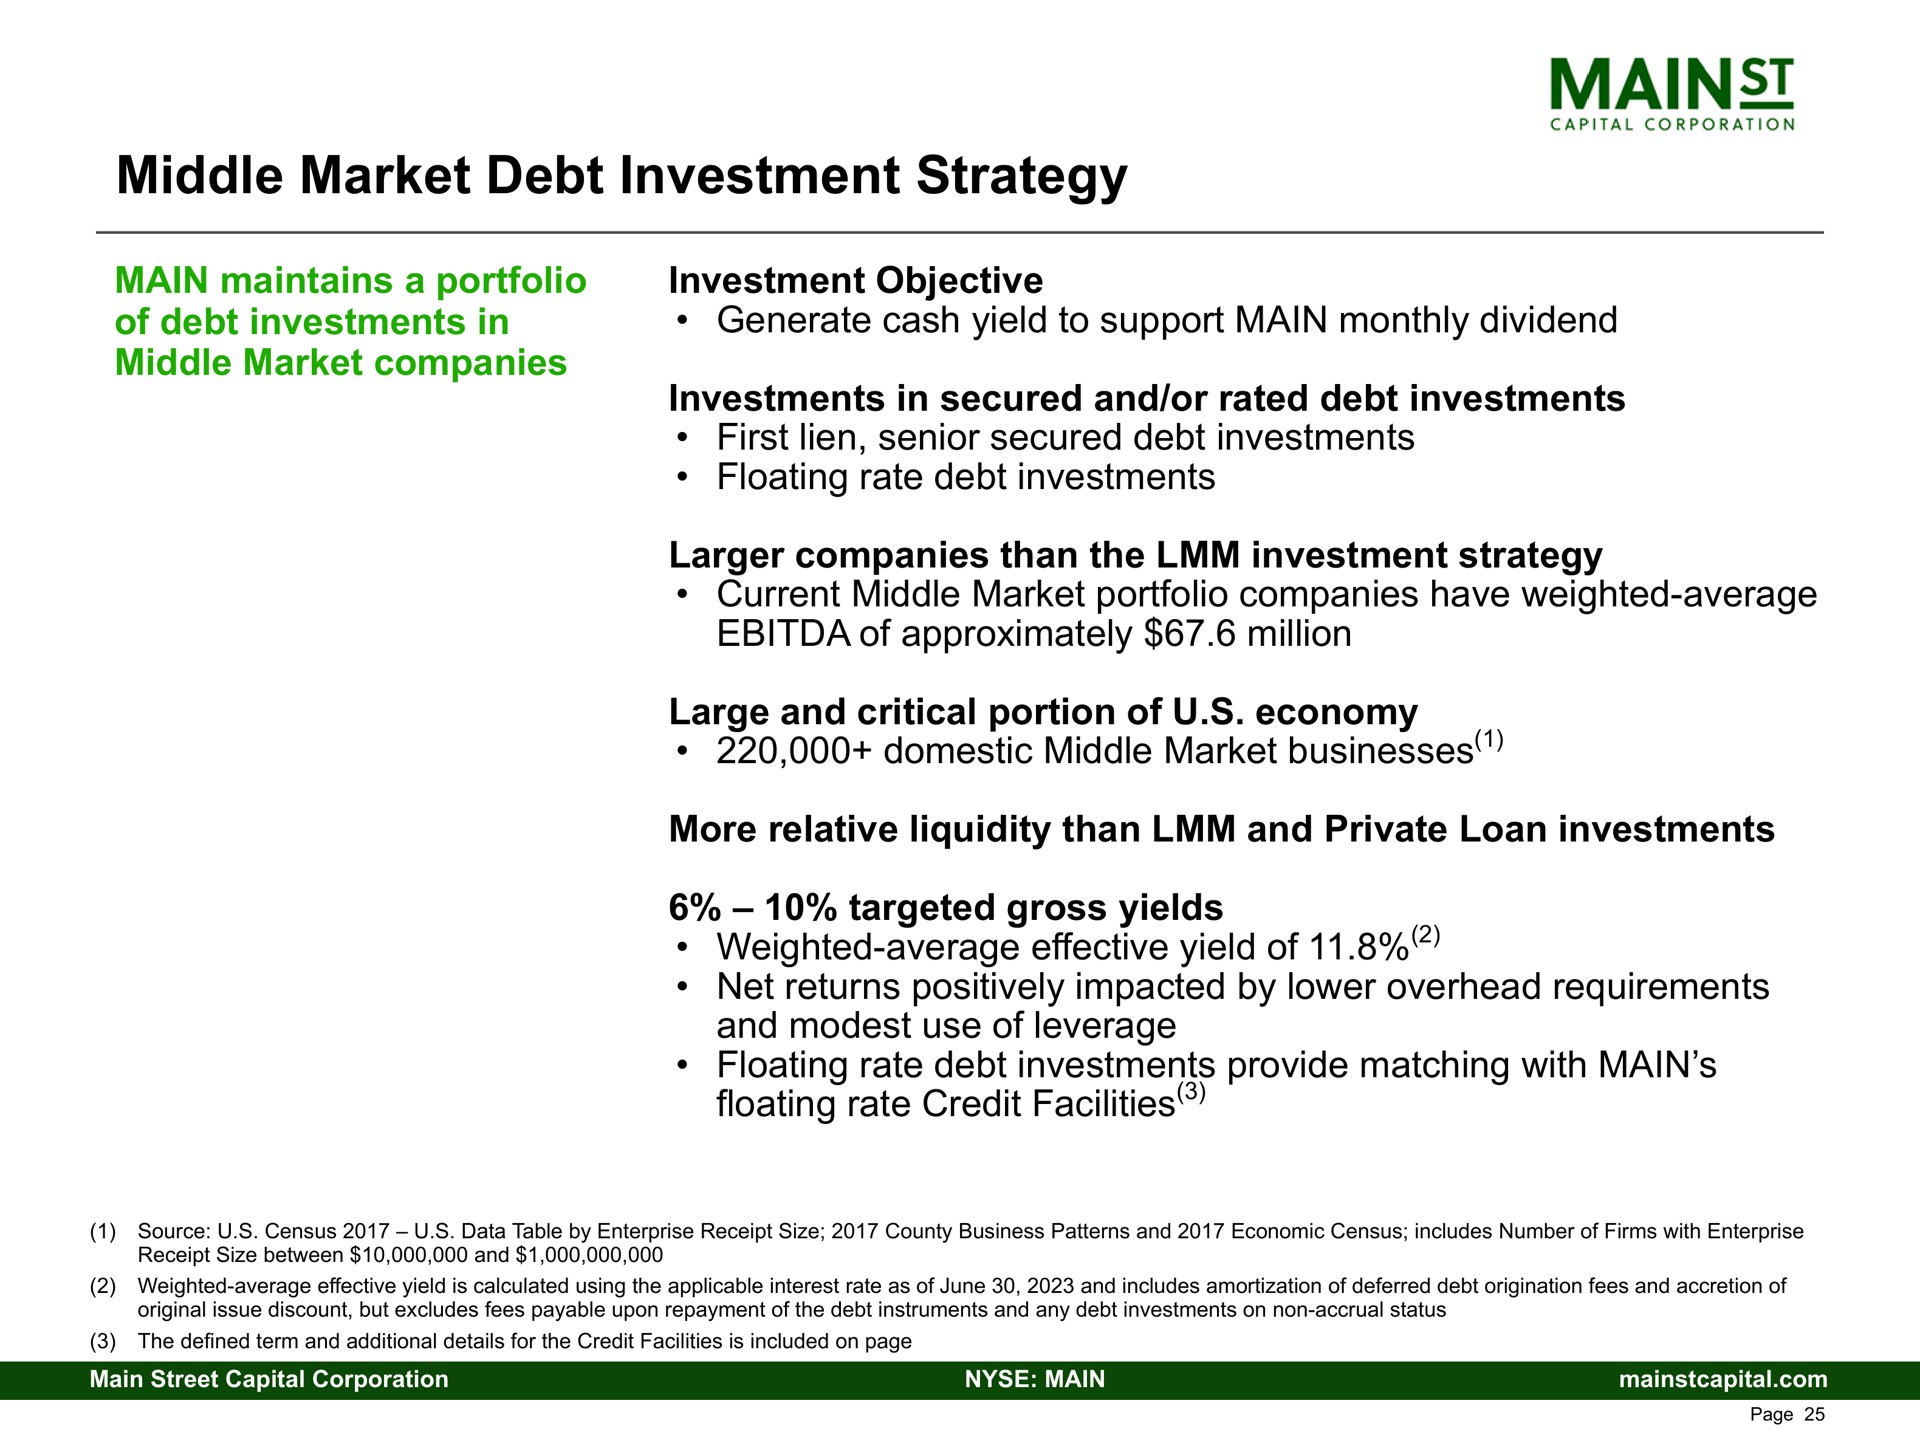 middle market debt investment strategy main maintains a portfolio of debt investments in middle market companies investment objective generate cash yield to support main monthly dividend investments in secured and or rated debt investments first lien senior secured debt investments floating rate debt investments companies than the investment strategy current middle market portfolio companies have weighted average of approximately million large and critical portion of economy domestic middle market businesses more relative liquidity than and private loan investments targeted gross yields weighted average effective yield of net returns positively impacted by lower overhead requirements and modest use of leverage floating rate debt investments provide matching with main floating rate credit facilities mains | Main Street Capital